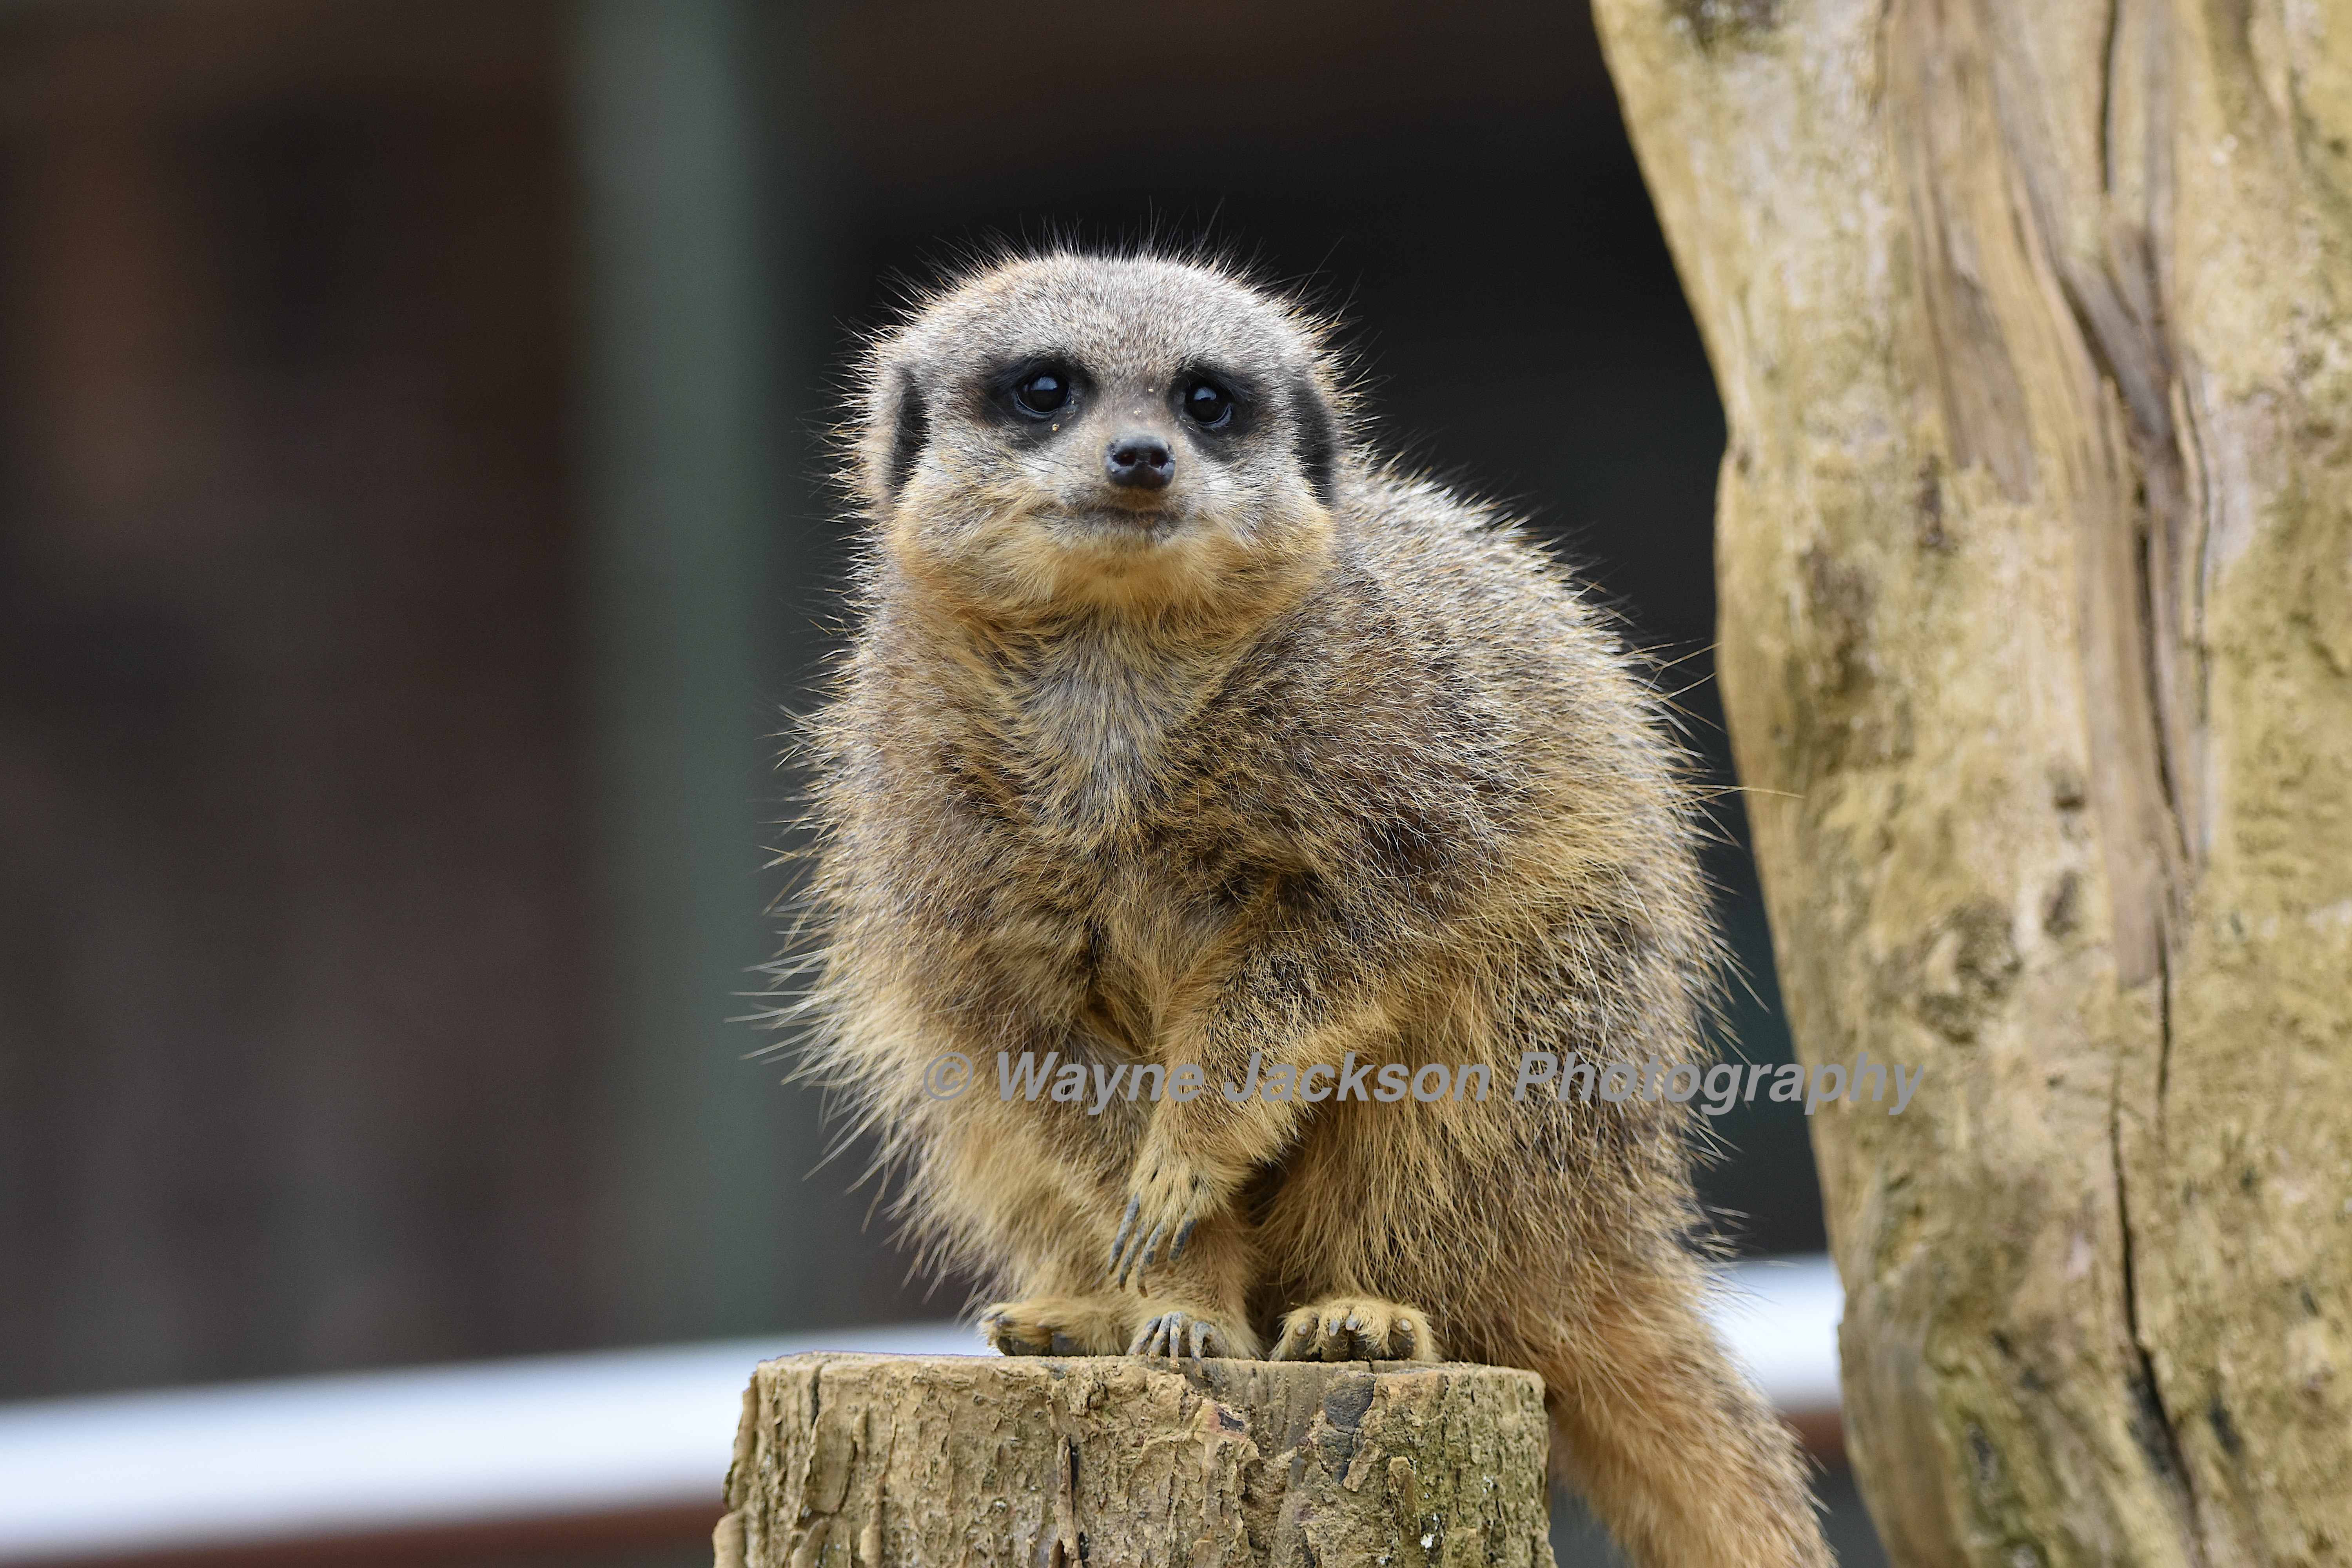 A meerkat sat on a log with a dark blurred out background